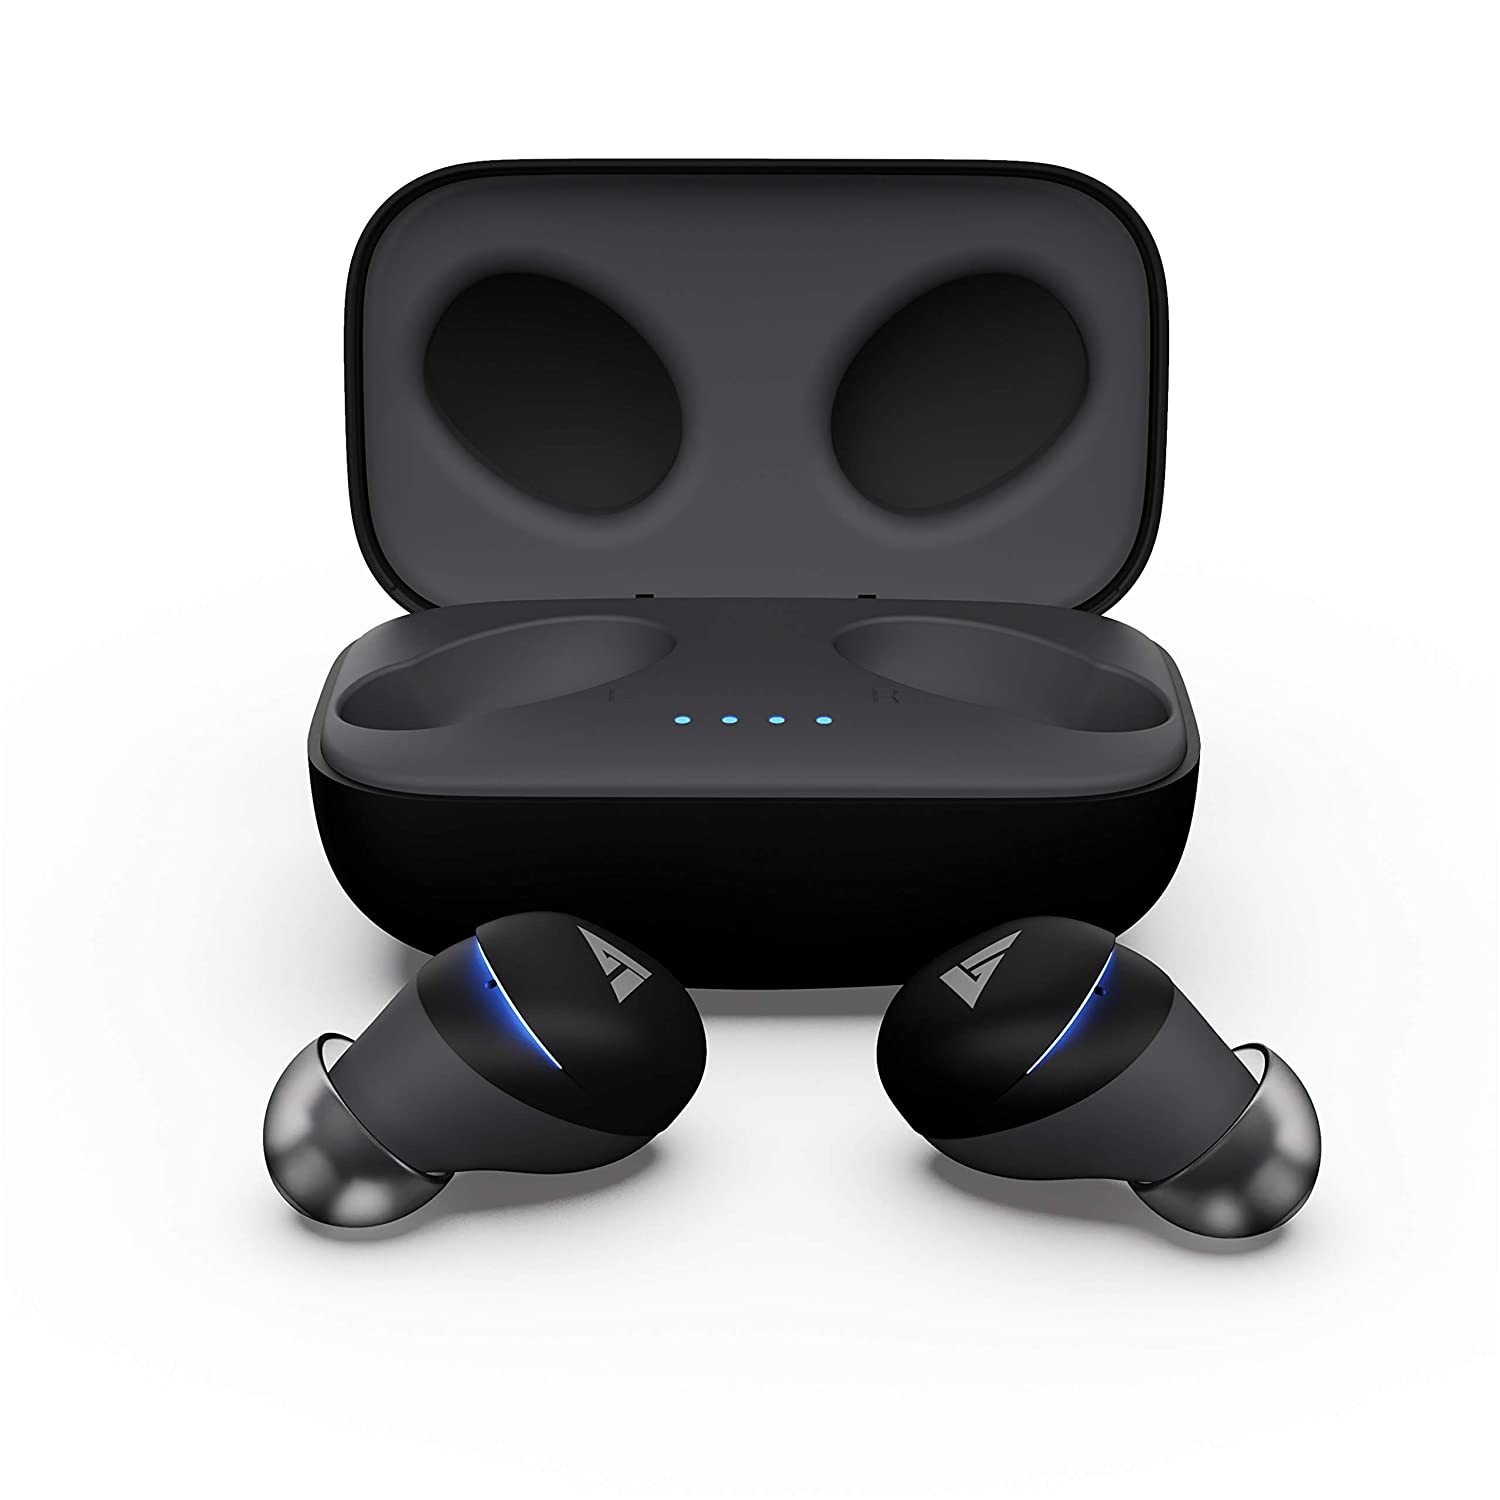 Buy Boult Audio AirBass Zigbuds Truly Wireless Bluetooth in Ear Earbuds with Mic (Grey)